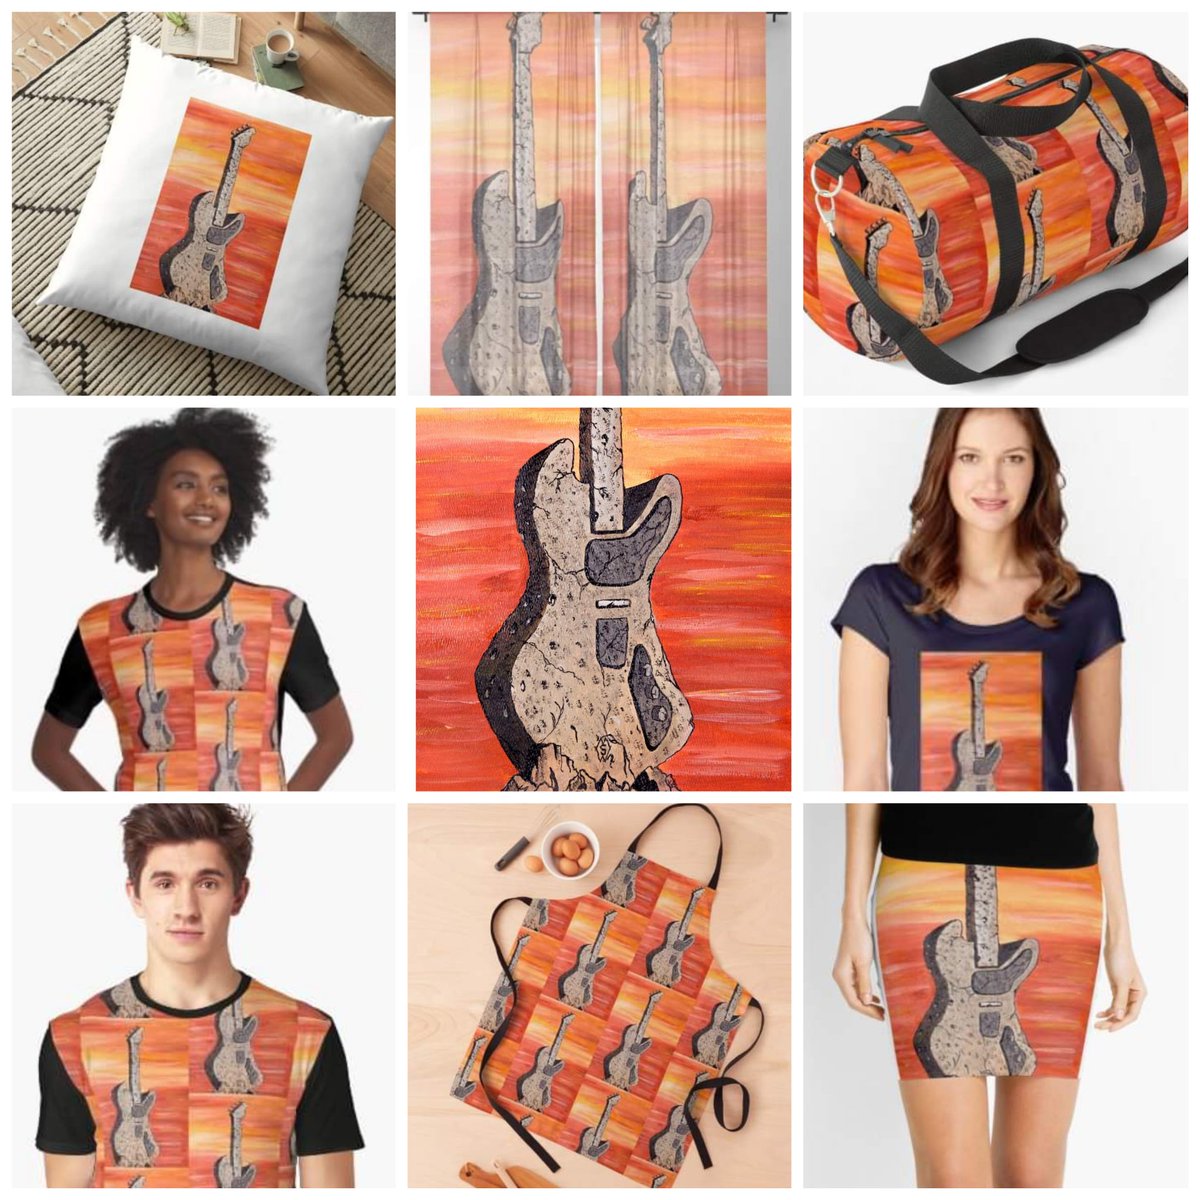 This is my acrylic painting of a rock guitar monument with some  products.  redbubble.com/shop/ap/325620… 
#mattstarrfineart #paintings #artforsale  #artoftheday #gift #giftideas #tshirts #art #rockguitar #guitar #music #band #instrument #electricguitar #vintagerock #guitarist